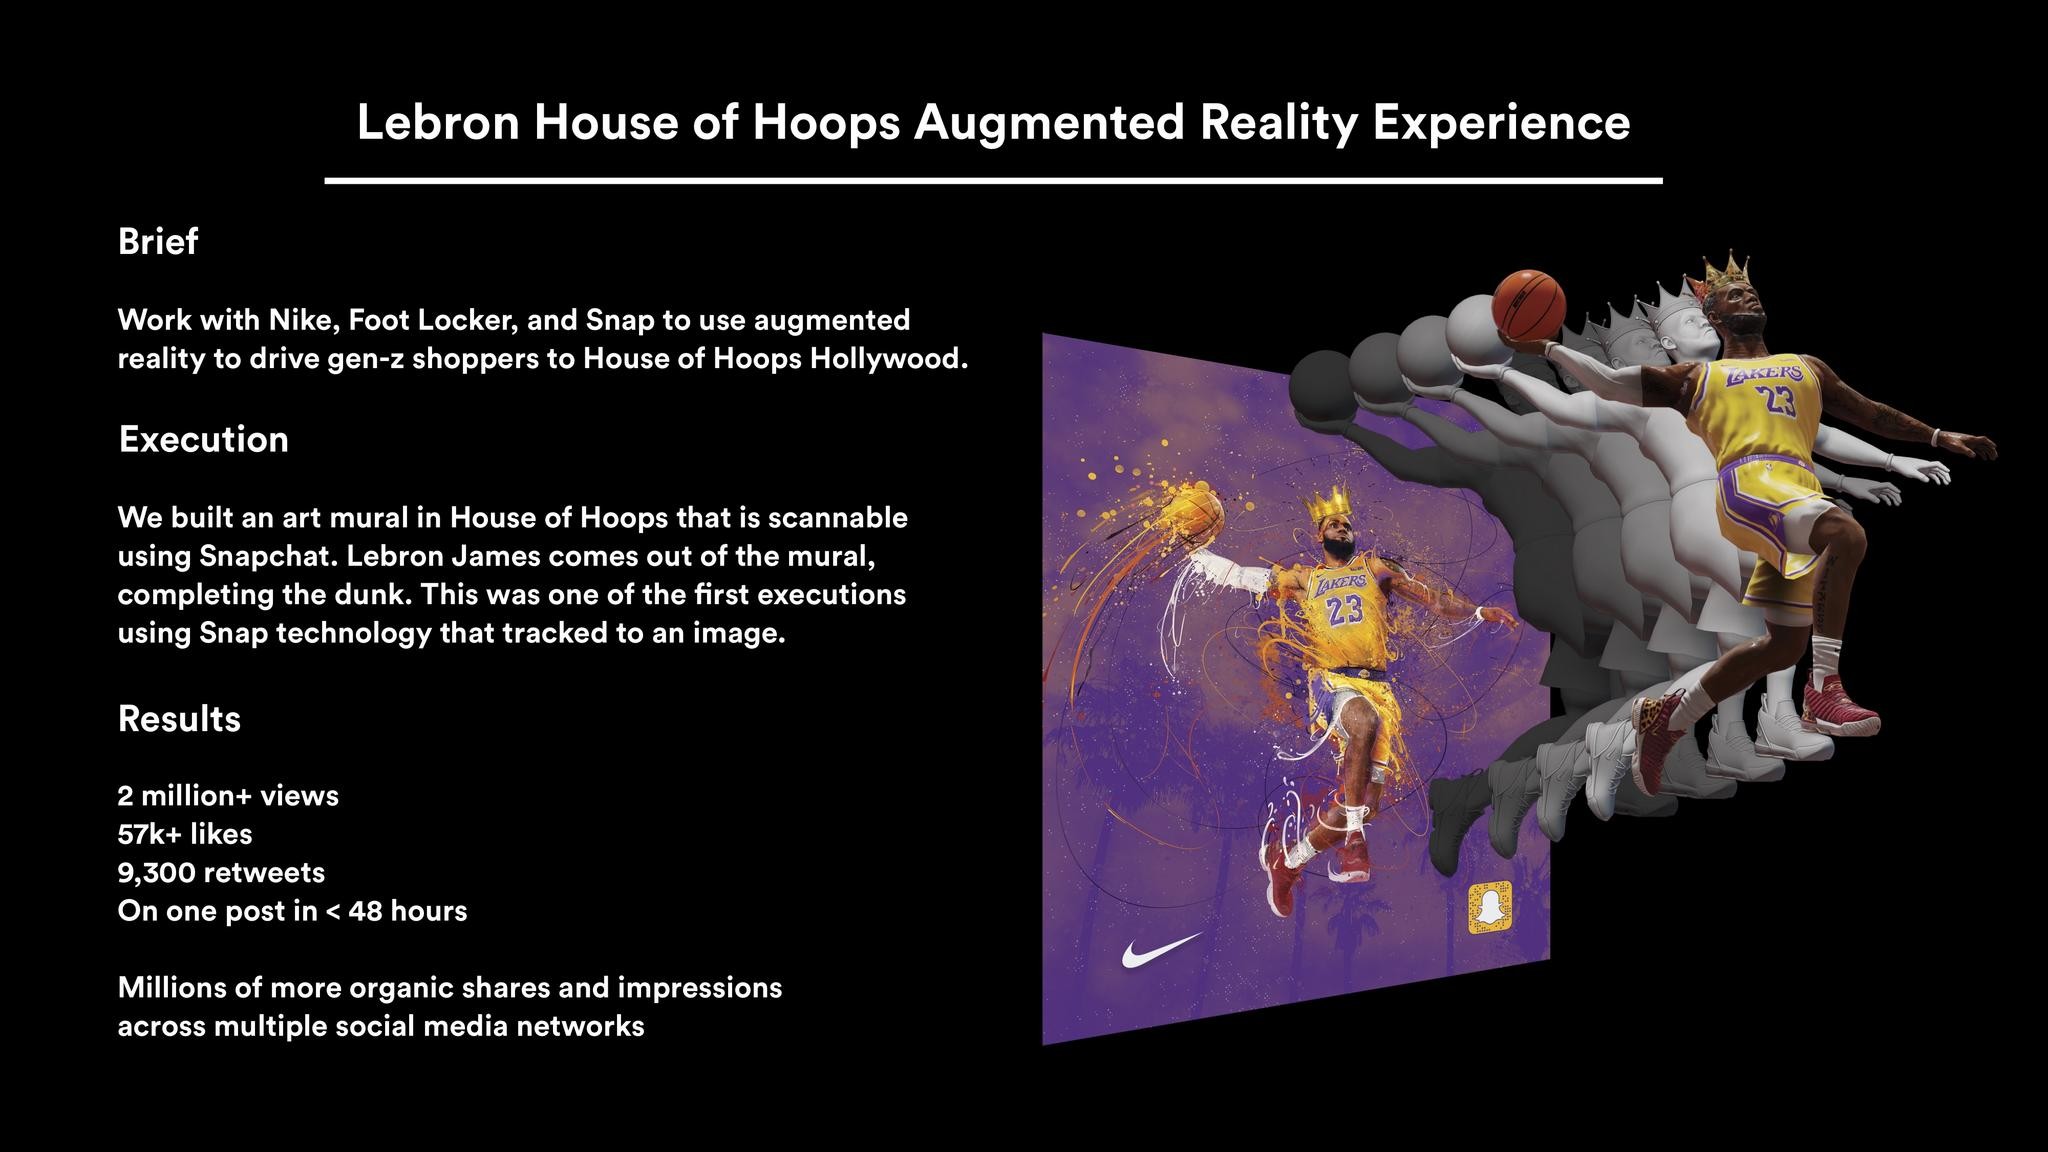 Lebron House of Hoops Augmented Reality Experience